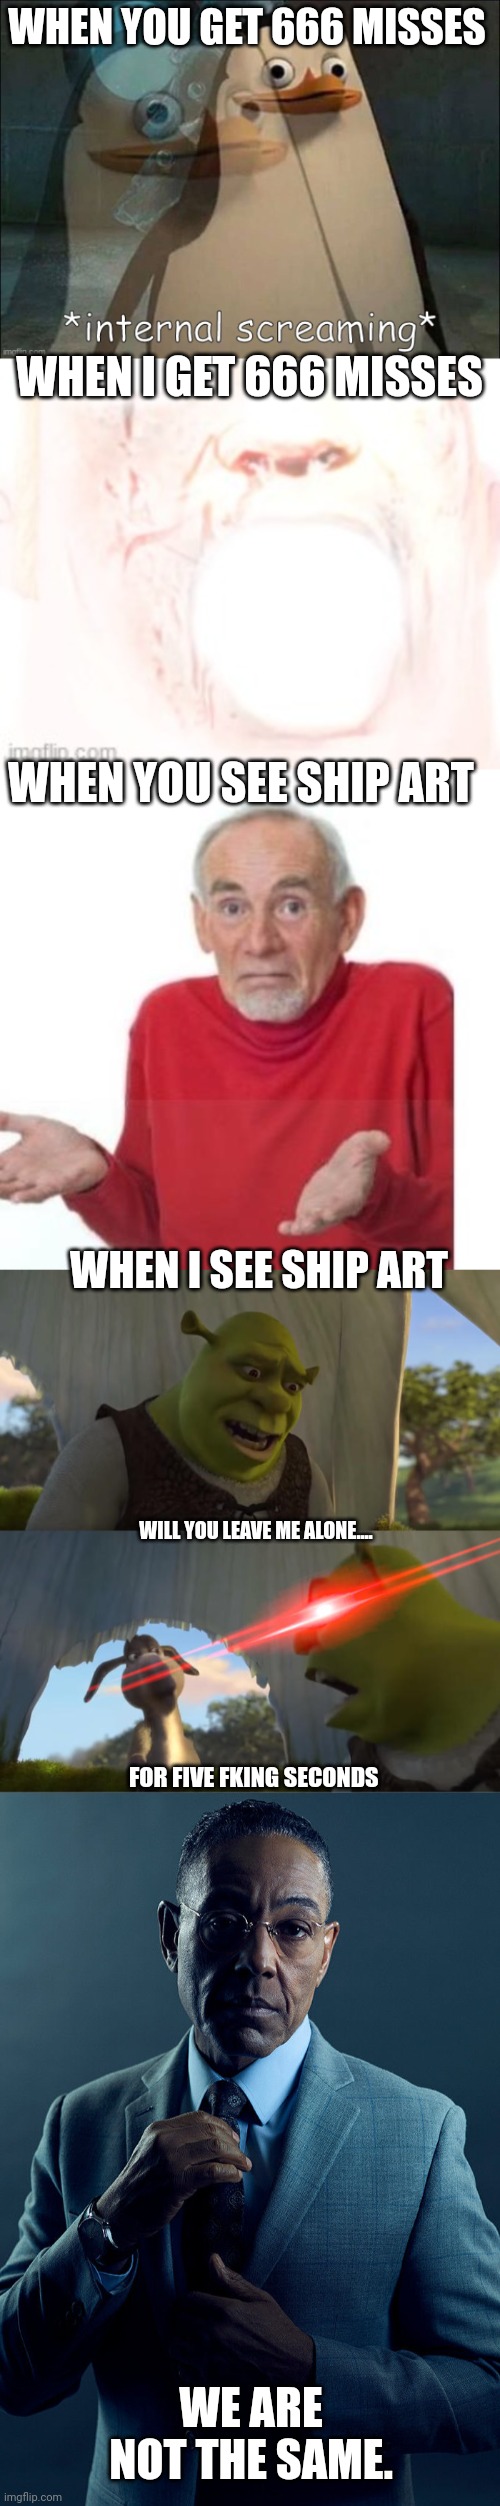 The multimeme returns! |  WHEN YOU GET 666 MISSES; WHEN I GET 666 MISSES; WHEN YOU SEE SHIP ART; WHEN I SEE SHIP ART; WILL YOU LEAVE ME ALONE.... FOR FIVE FKING SECONDS; WE ARE NOT THE SAME. | image tagged in private internal screaming,i guess ill die,shrek for five minutes,gus fring we are not the same,multimeme | made w/ Imgflip meme maker